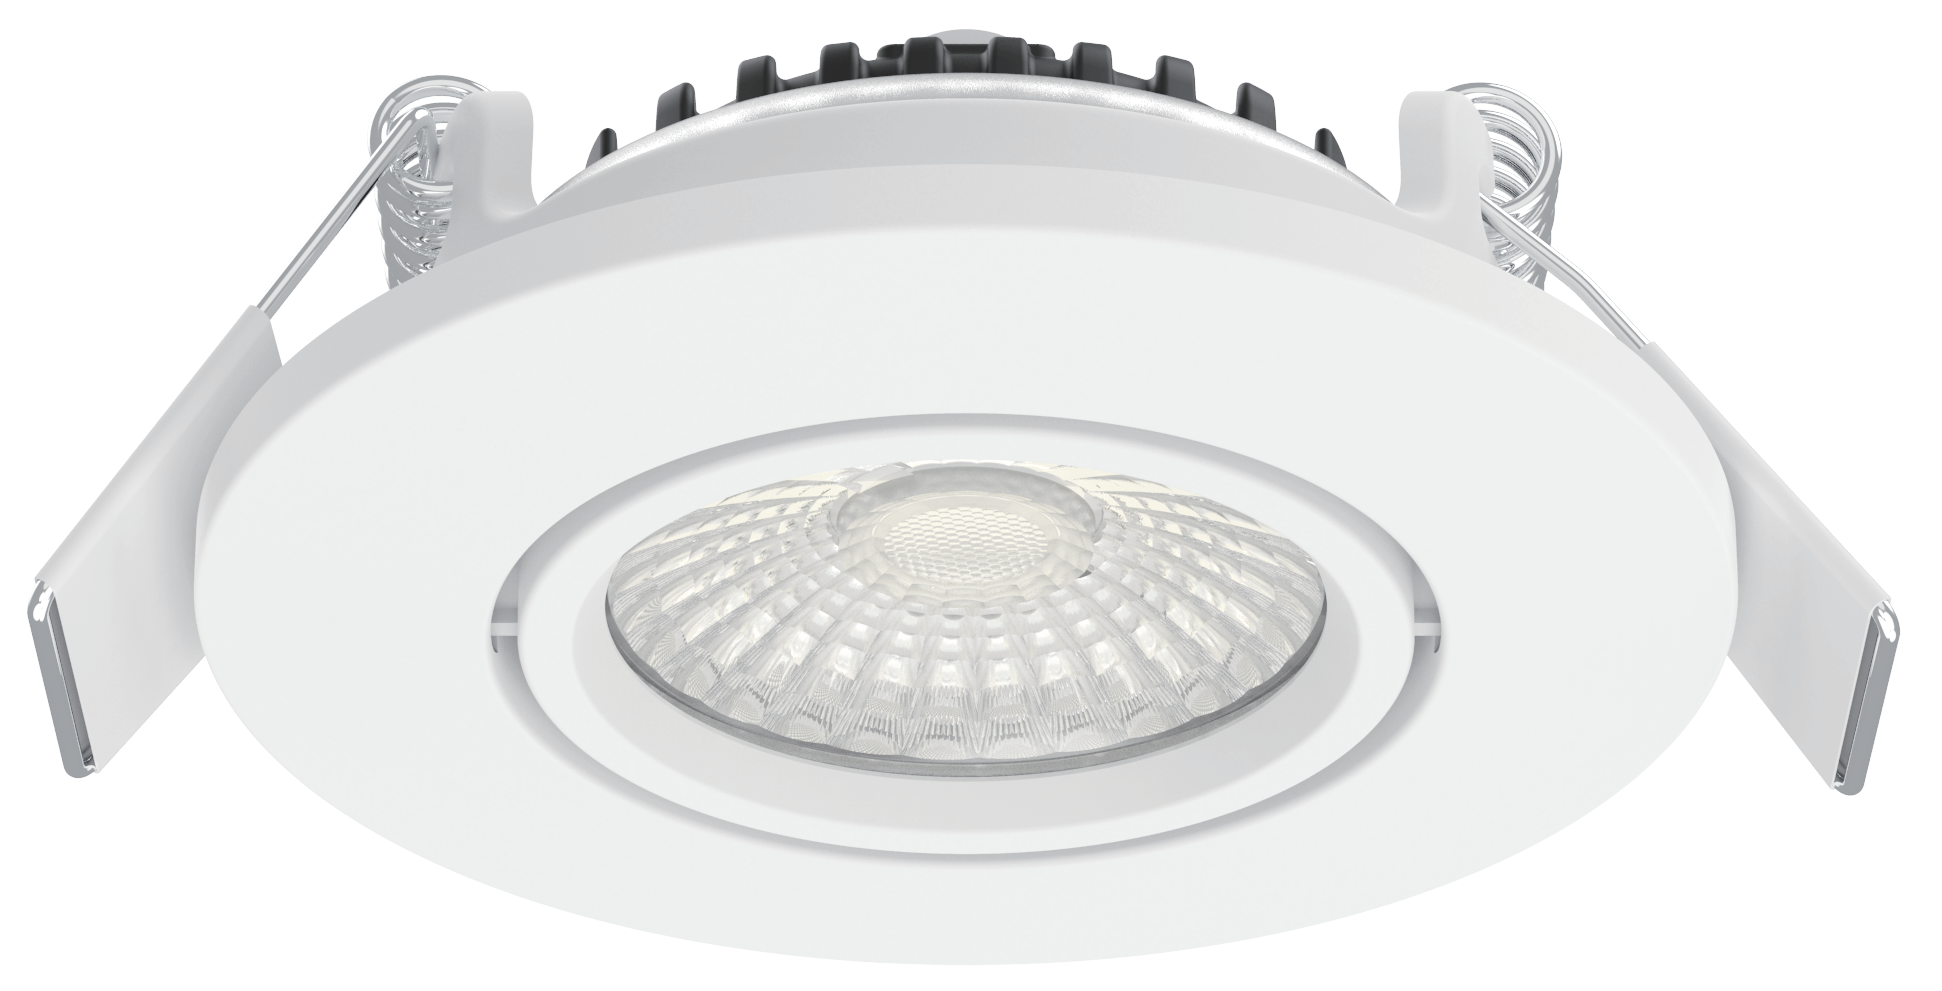 Edos 6W fixed/orientable led downlight 5RS149